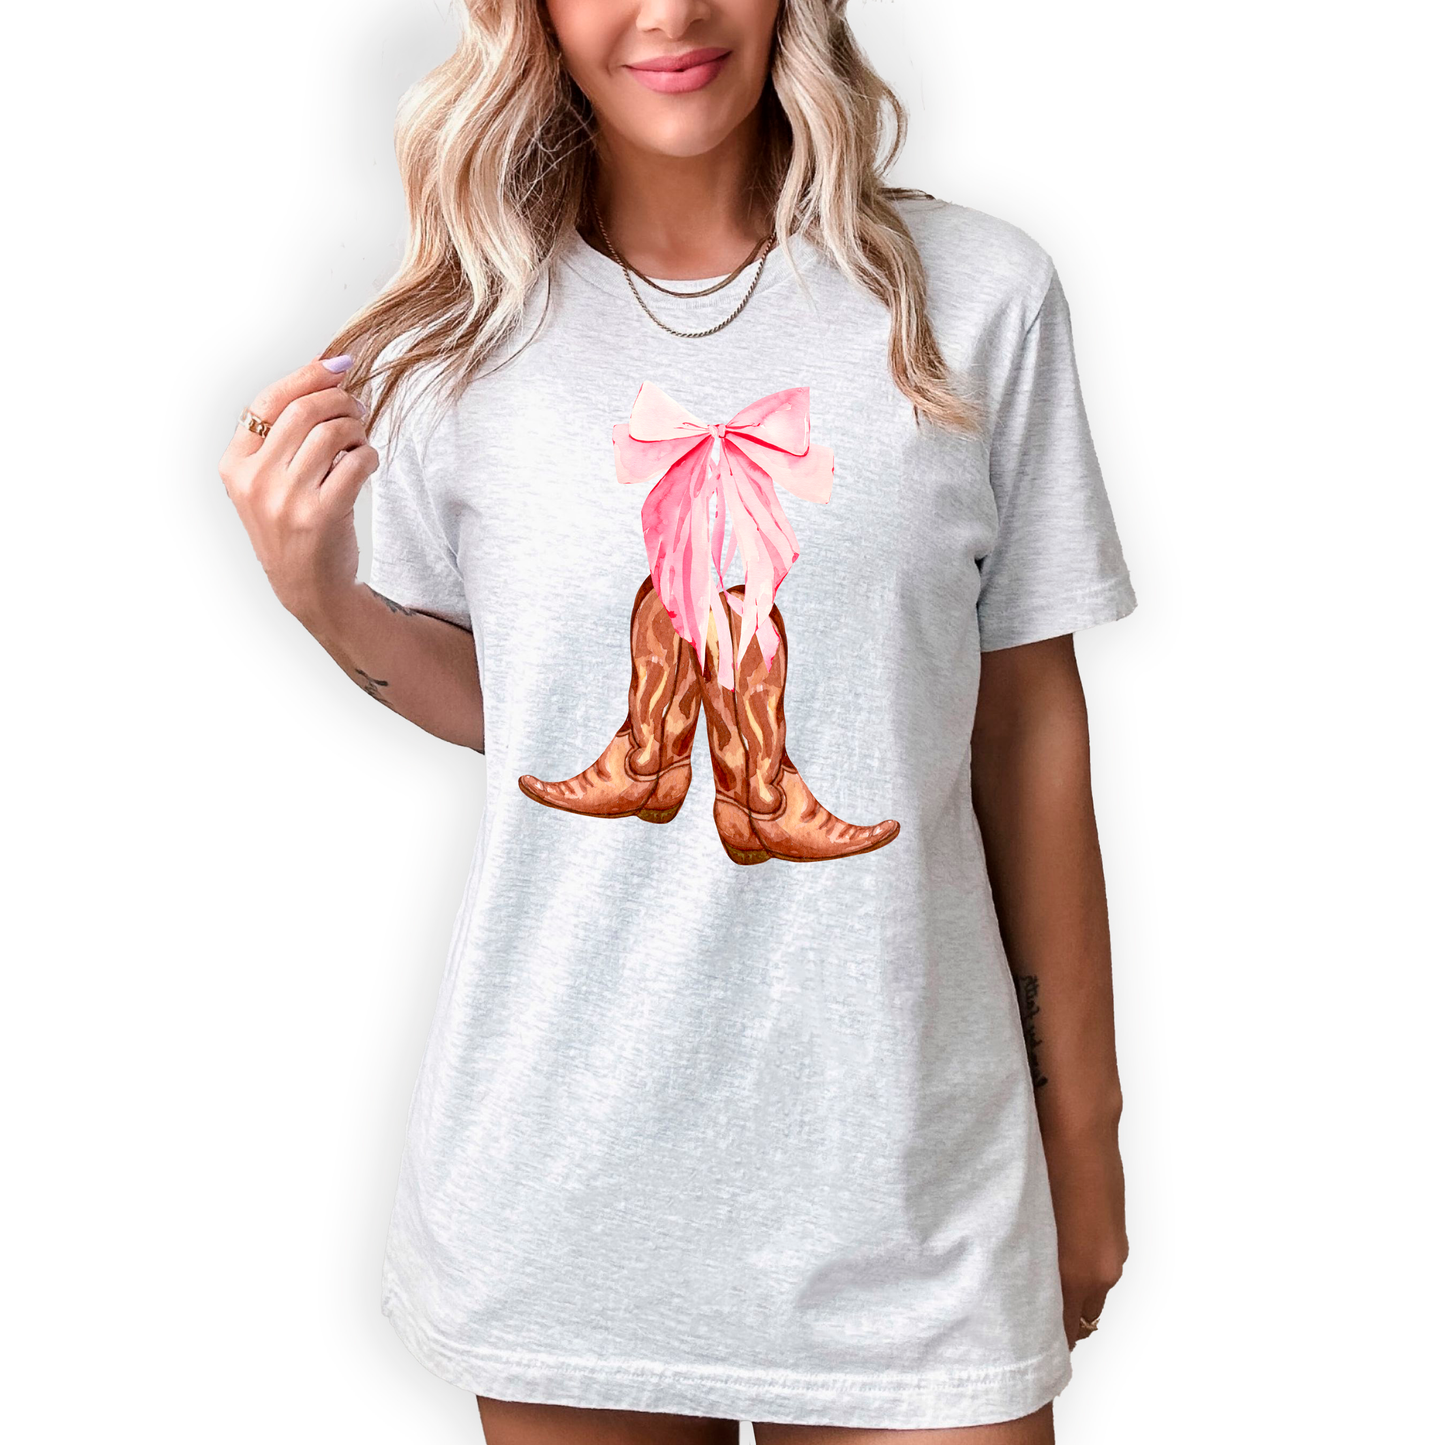 Cowboy Boots With Bow T-Shirt or Crew Sweatshirt